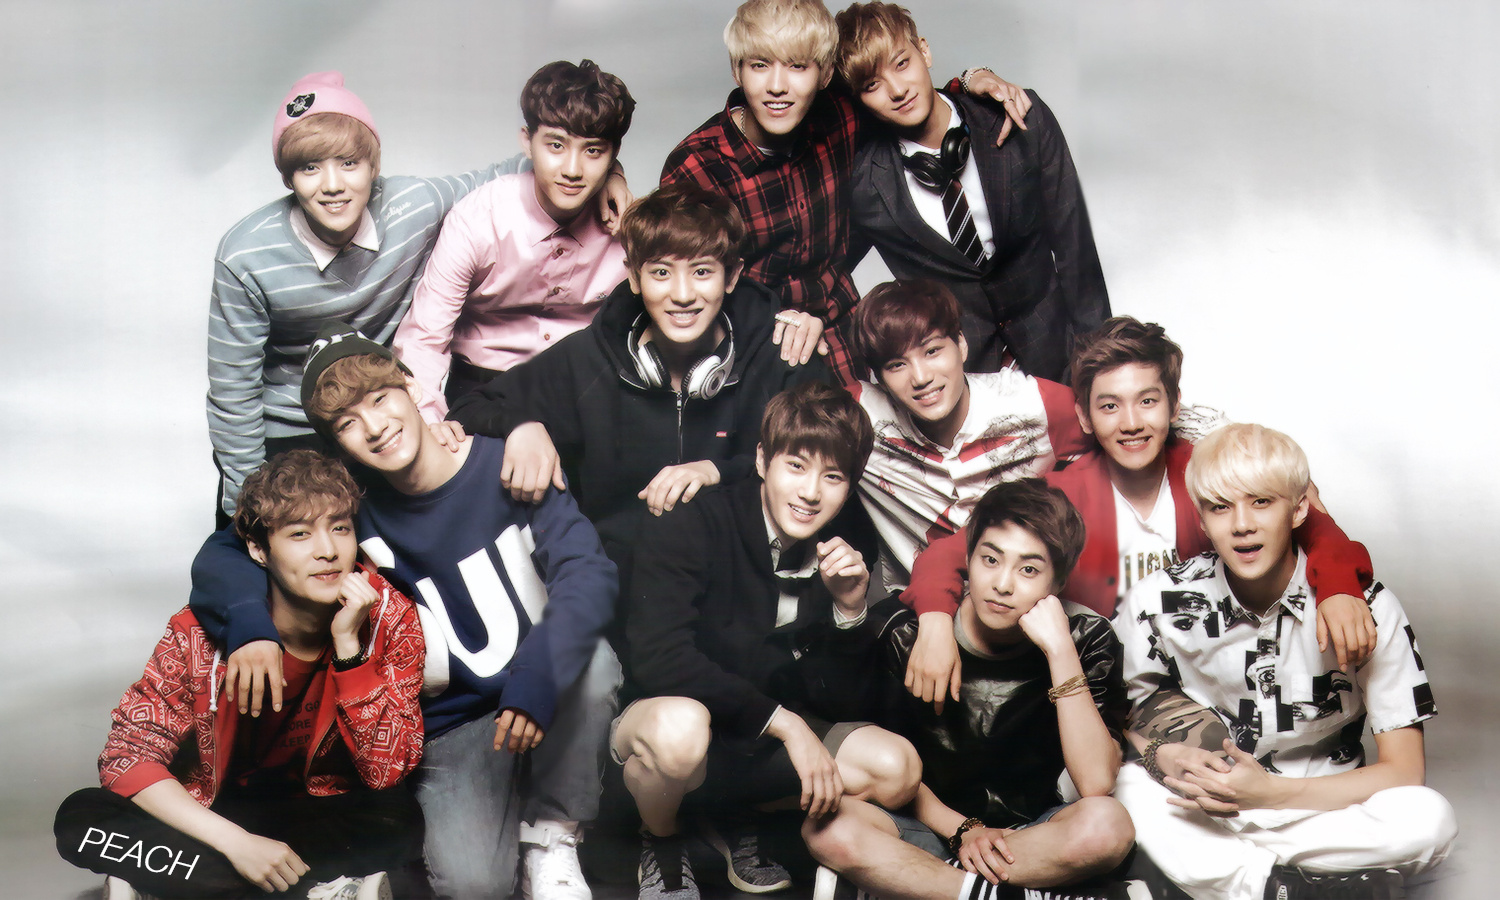 Exo photos " we are one "  galaxy and the other boys Aea4fdbbgw1eatoxl1m1ej215o0p0qhw